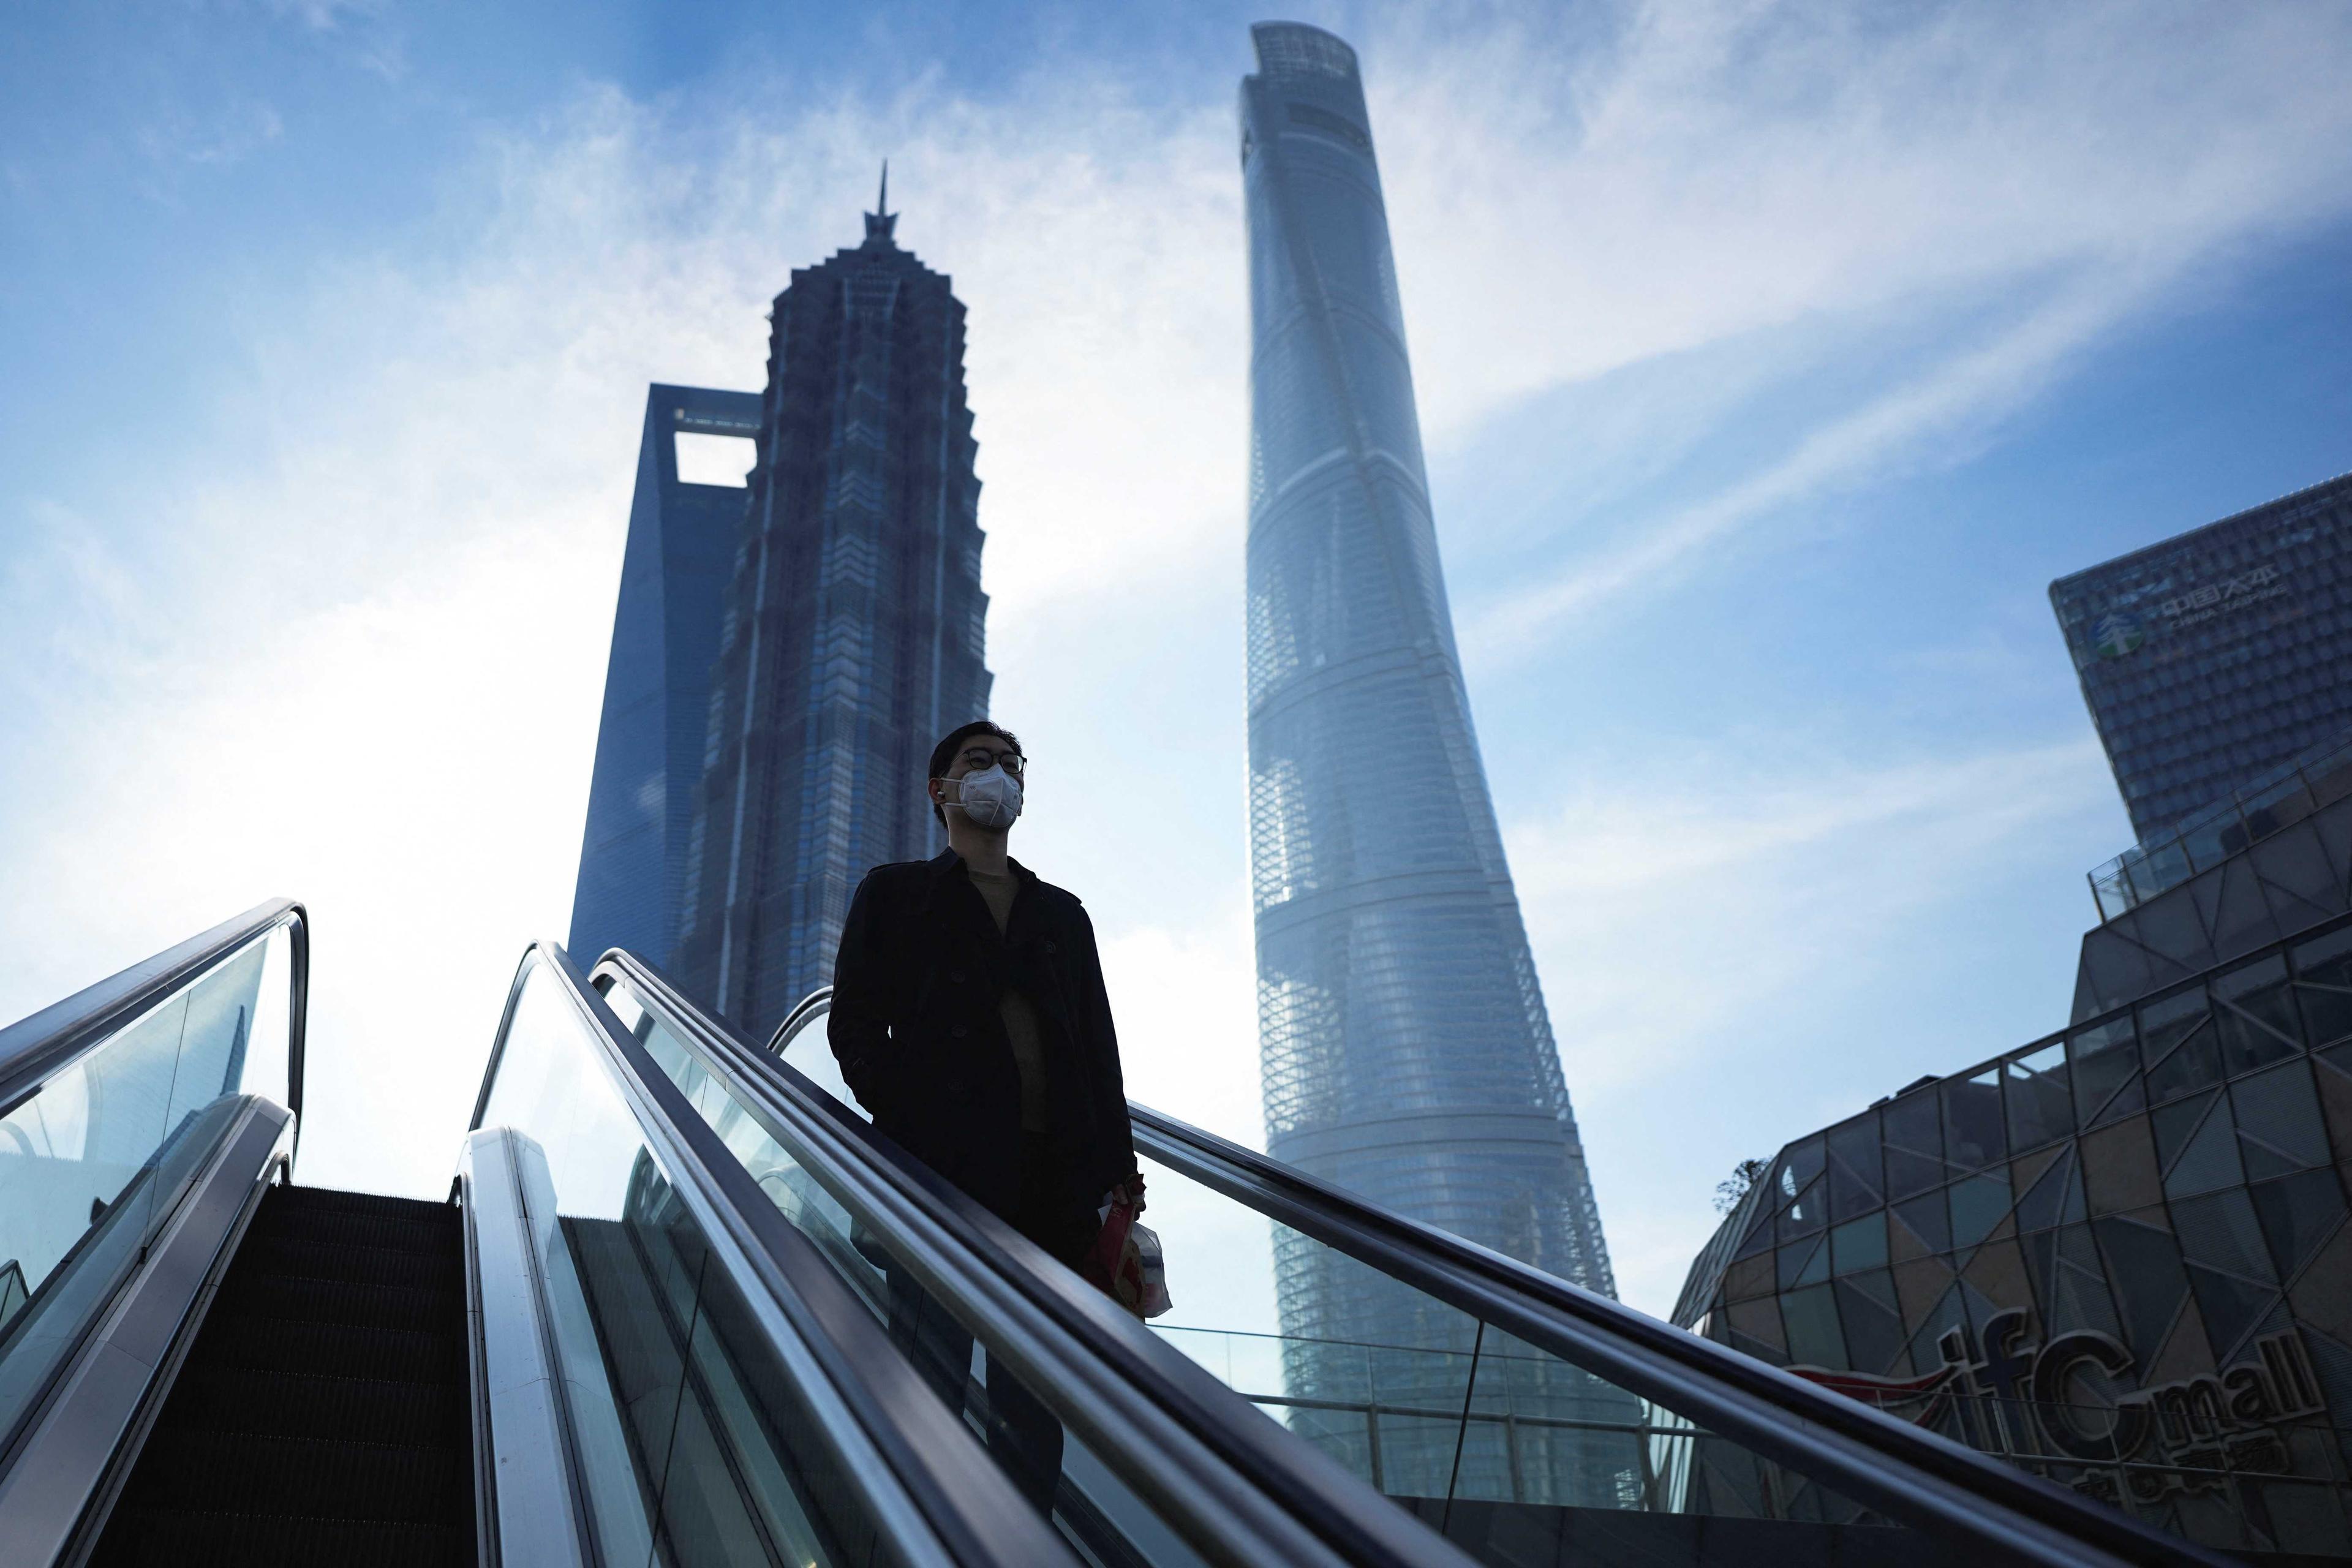 A man rides an escalator near office towers in the Lujiazui financial district, ahead of the National People's Congress (NPC), in Shanghai, China, Feb 28. Photo: Reuters